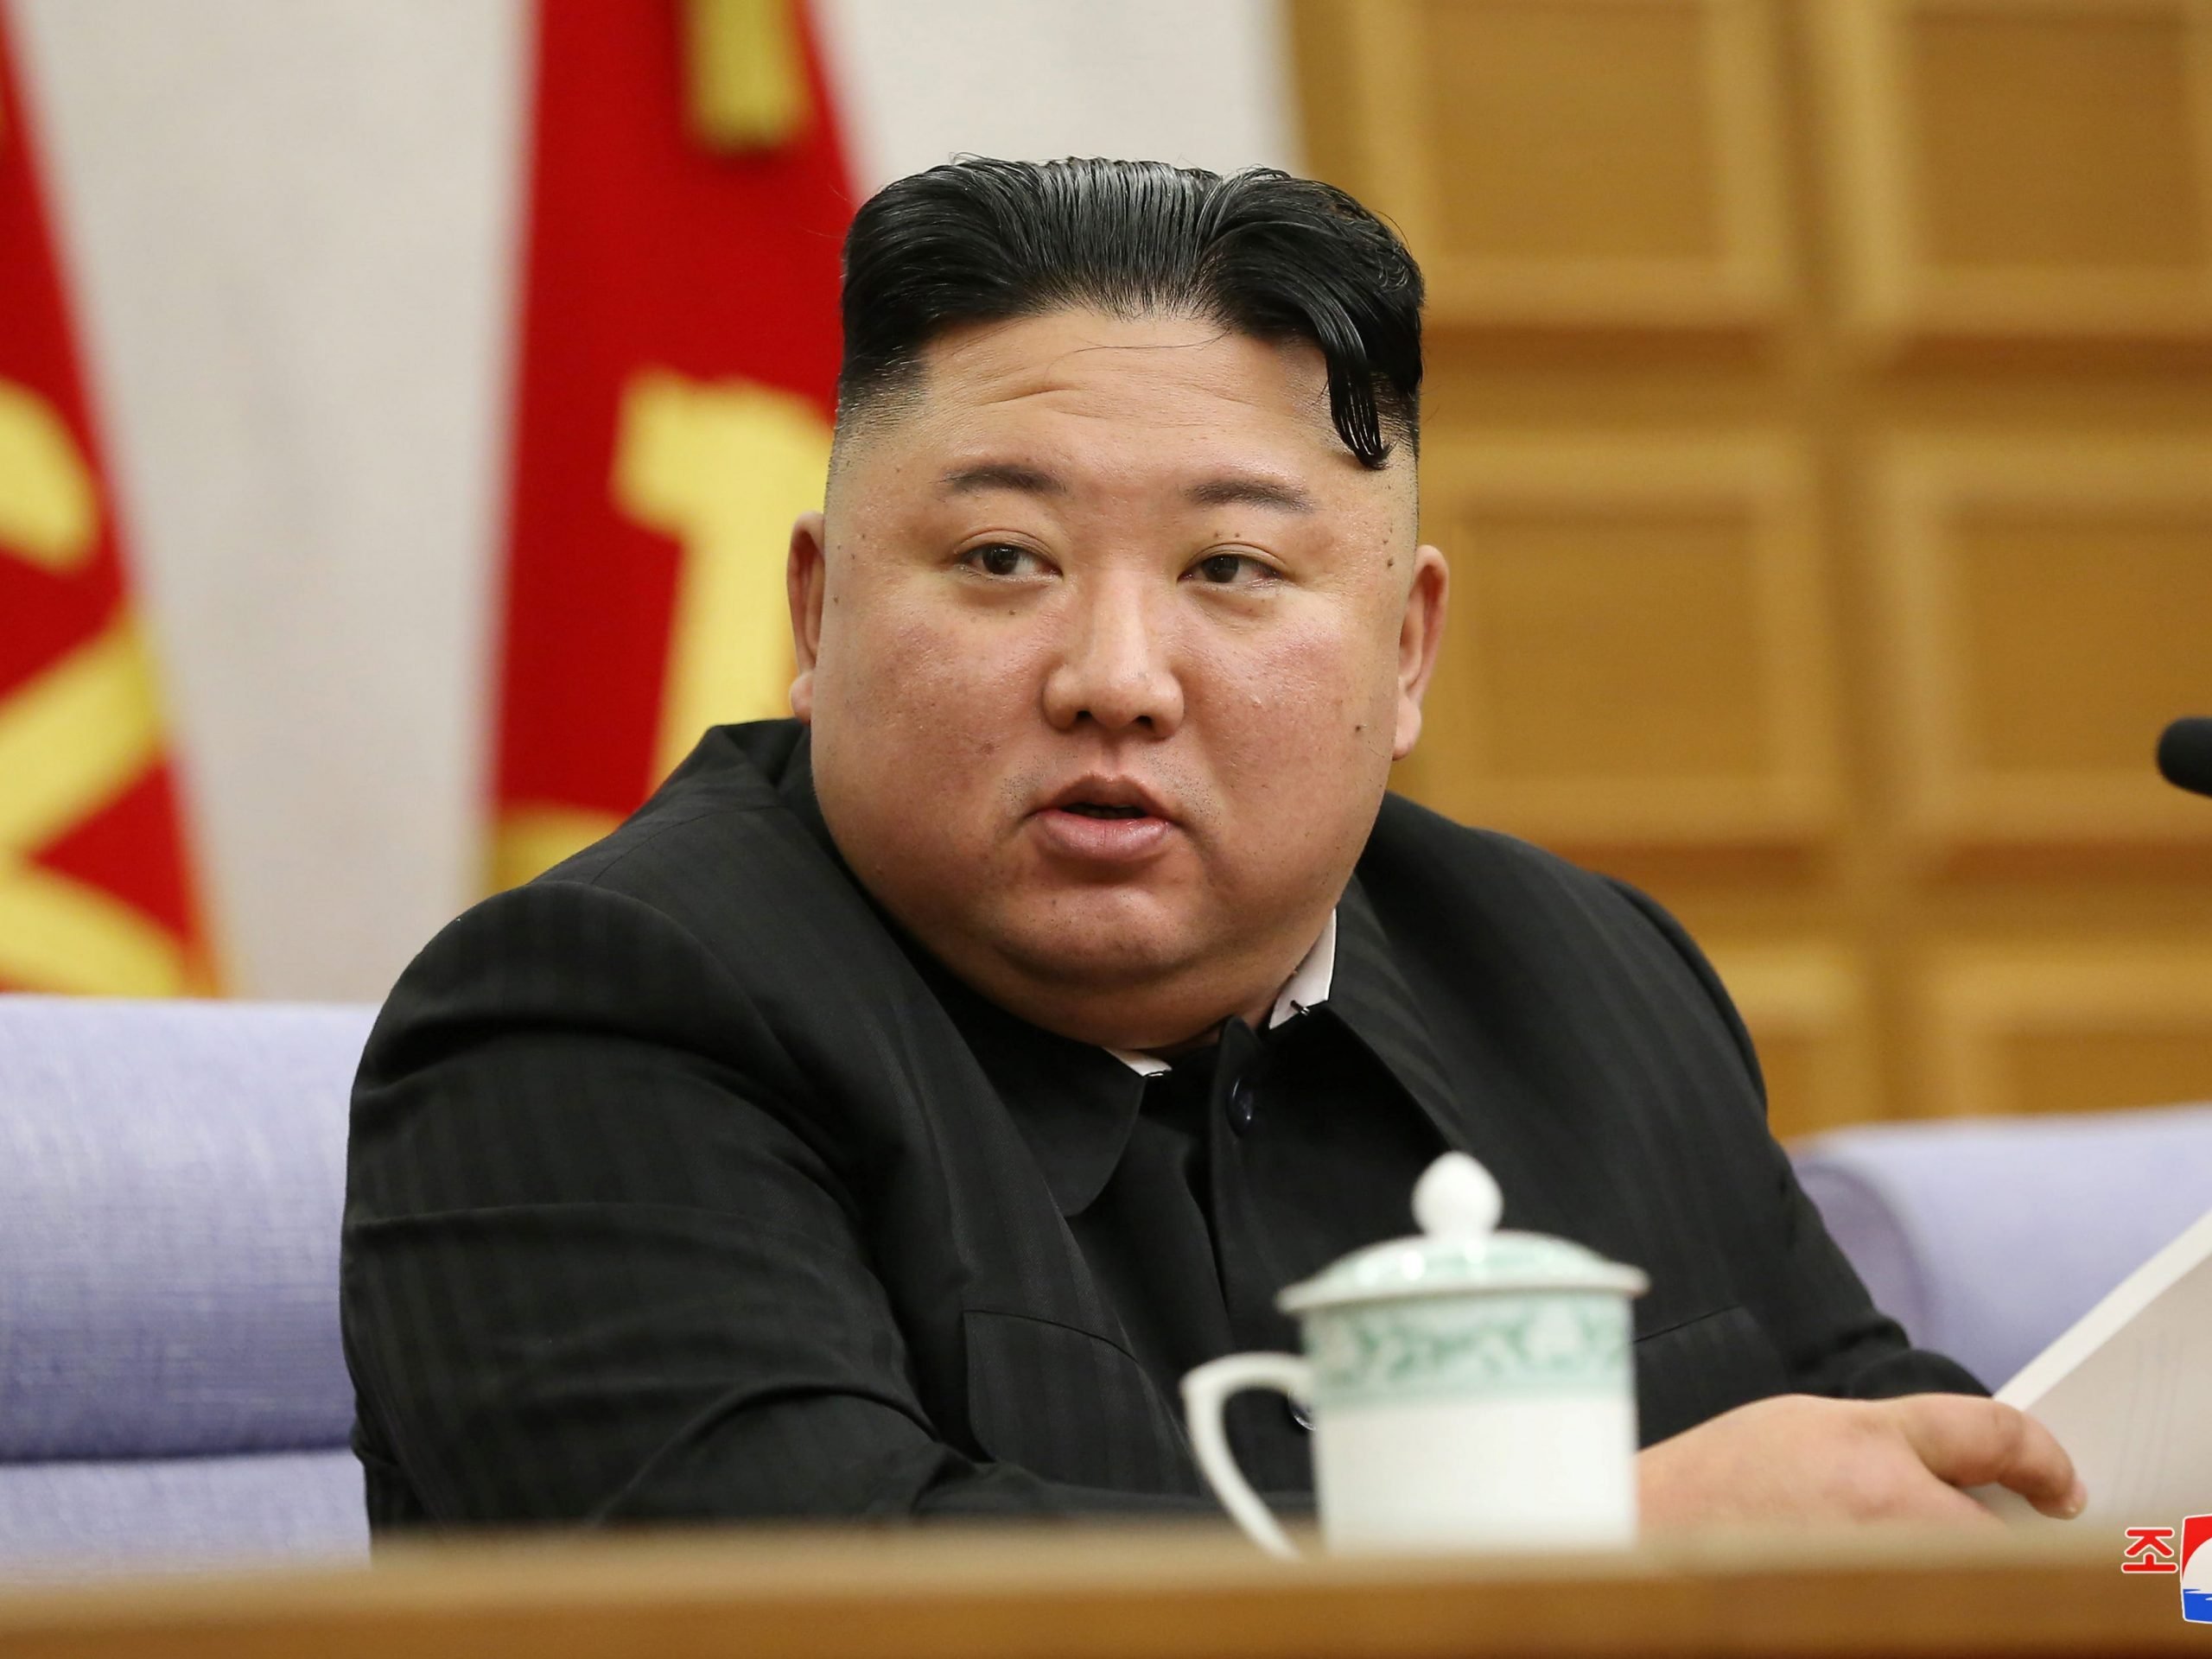 North Korean leader Kim Jong Un speaks during a plenary meeting of the Workers' Party central committee in Pyongyang, North Korea in this photo supplied by North Korea's Central News Agency (KCNA) on February 9, 2021